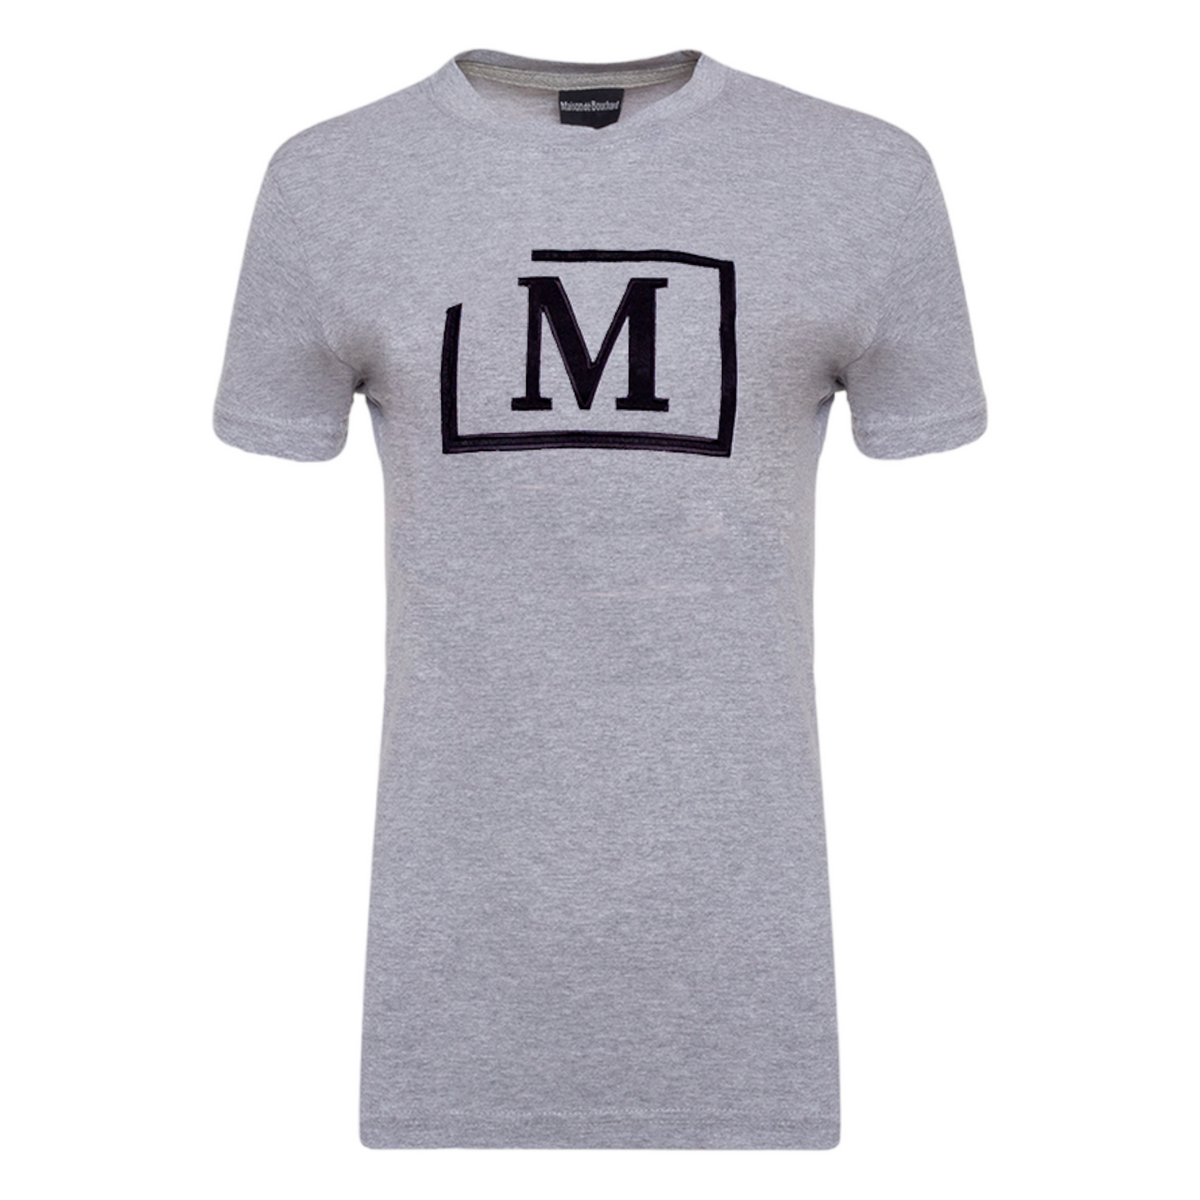 MDB Brand Women's Classic M Embroidered Logo Tee - Neutral Colors